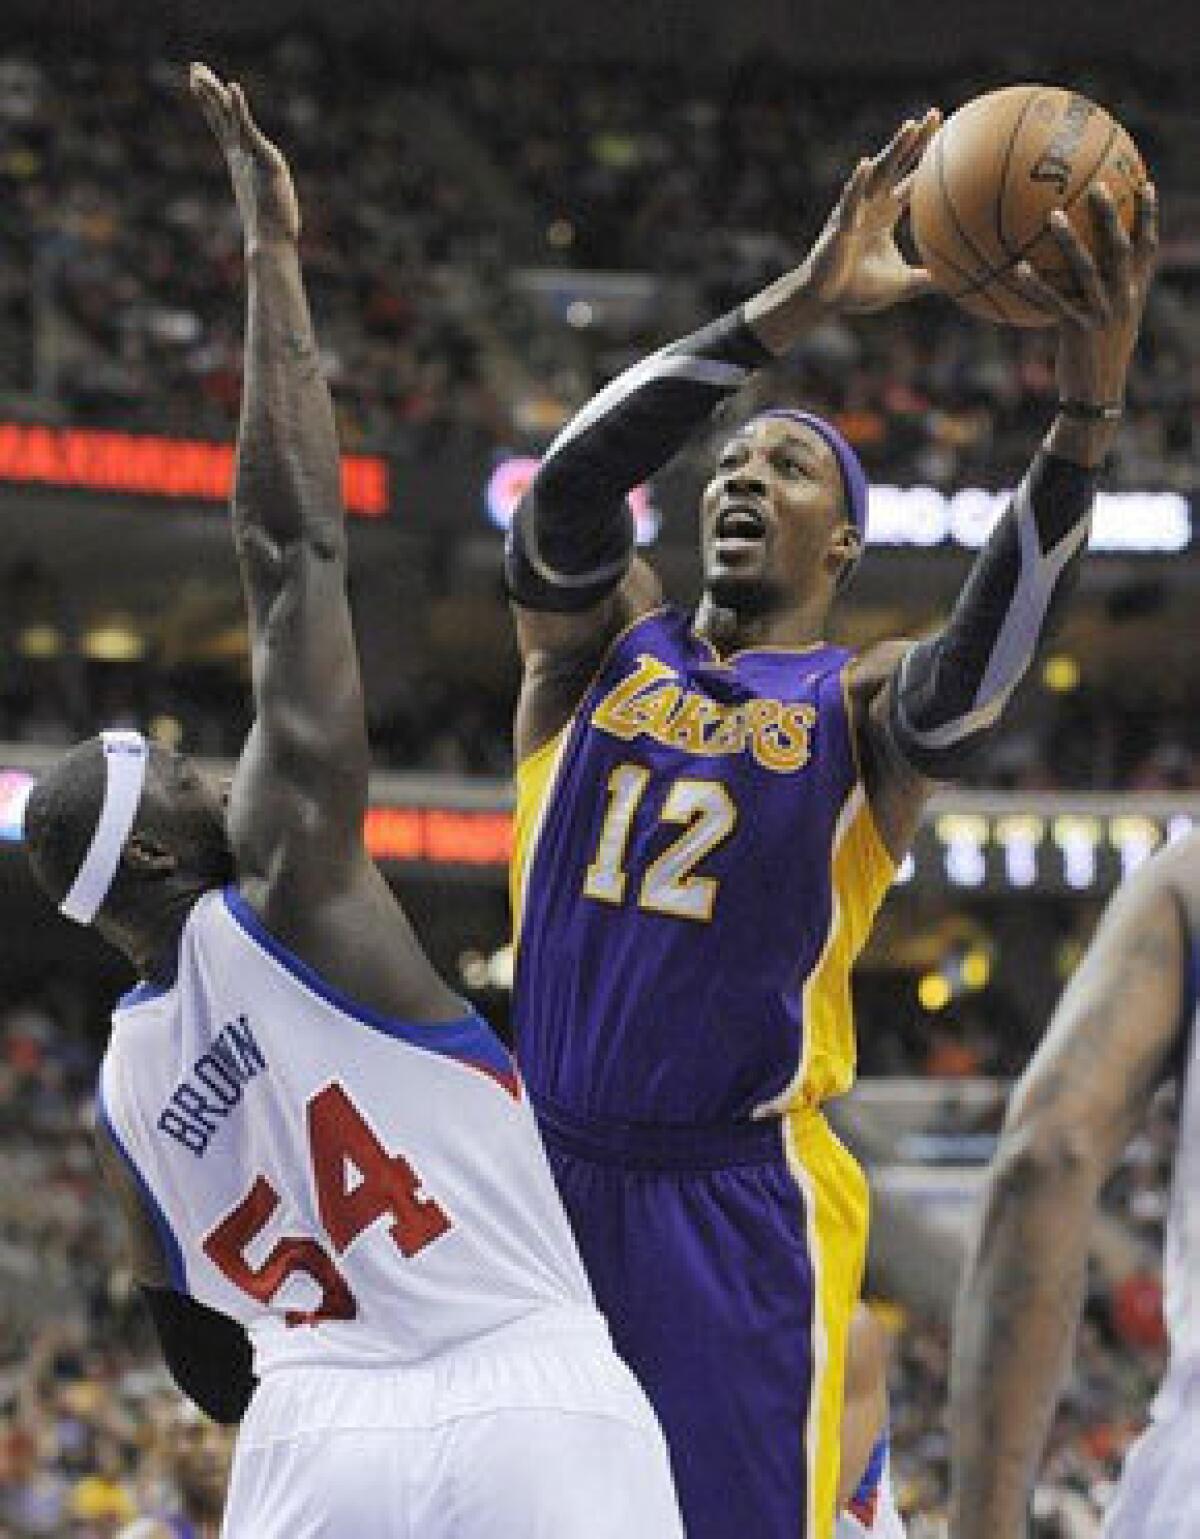 Dwight Howard shoots over Sixers big man Kwame Brown